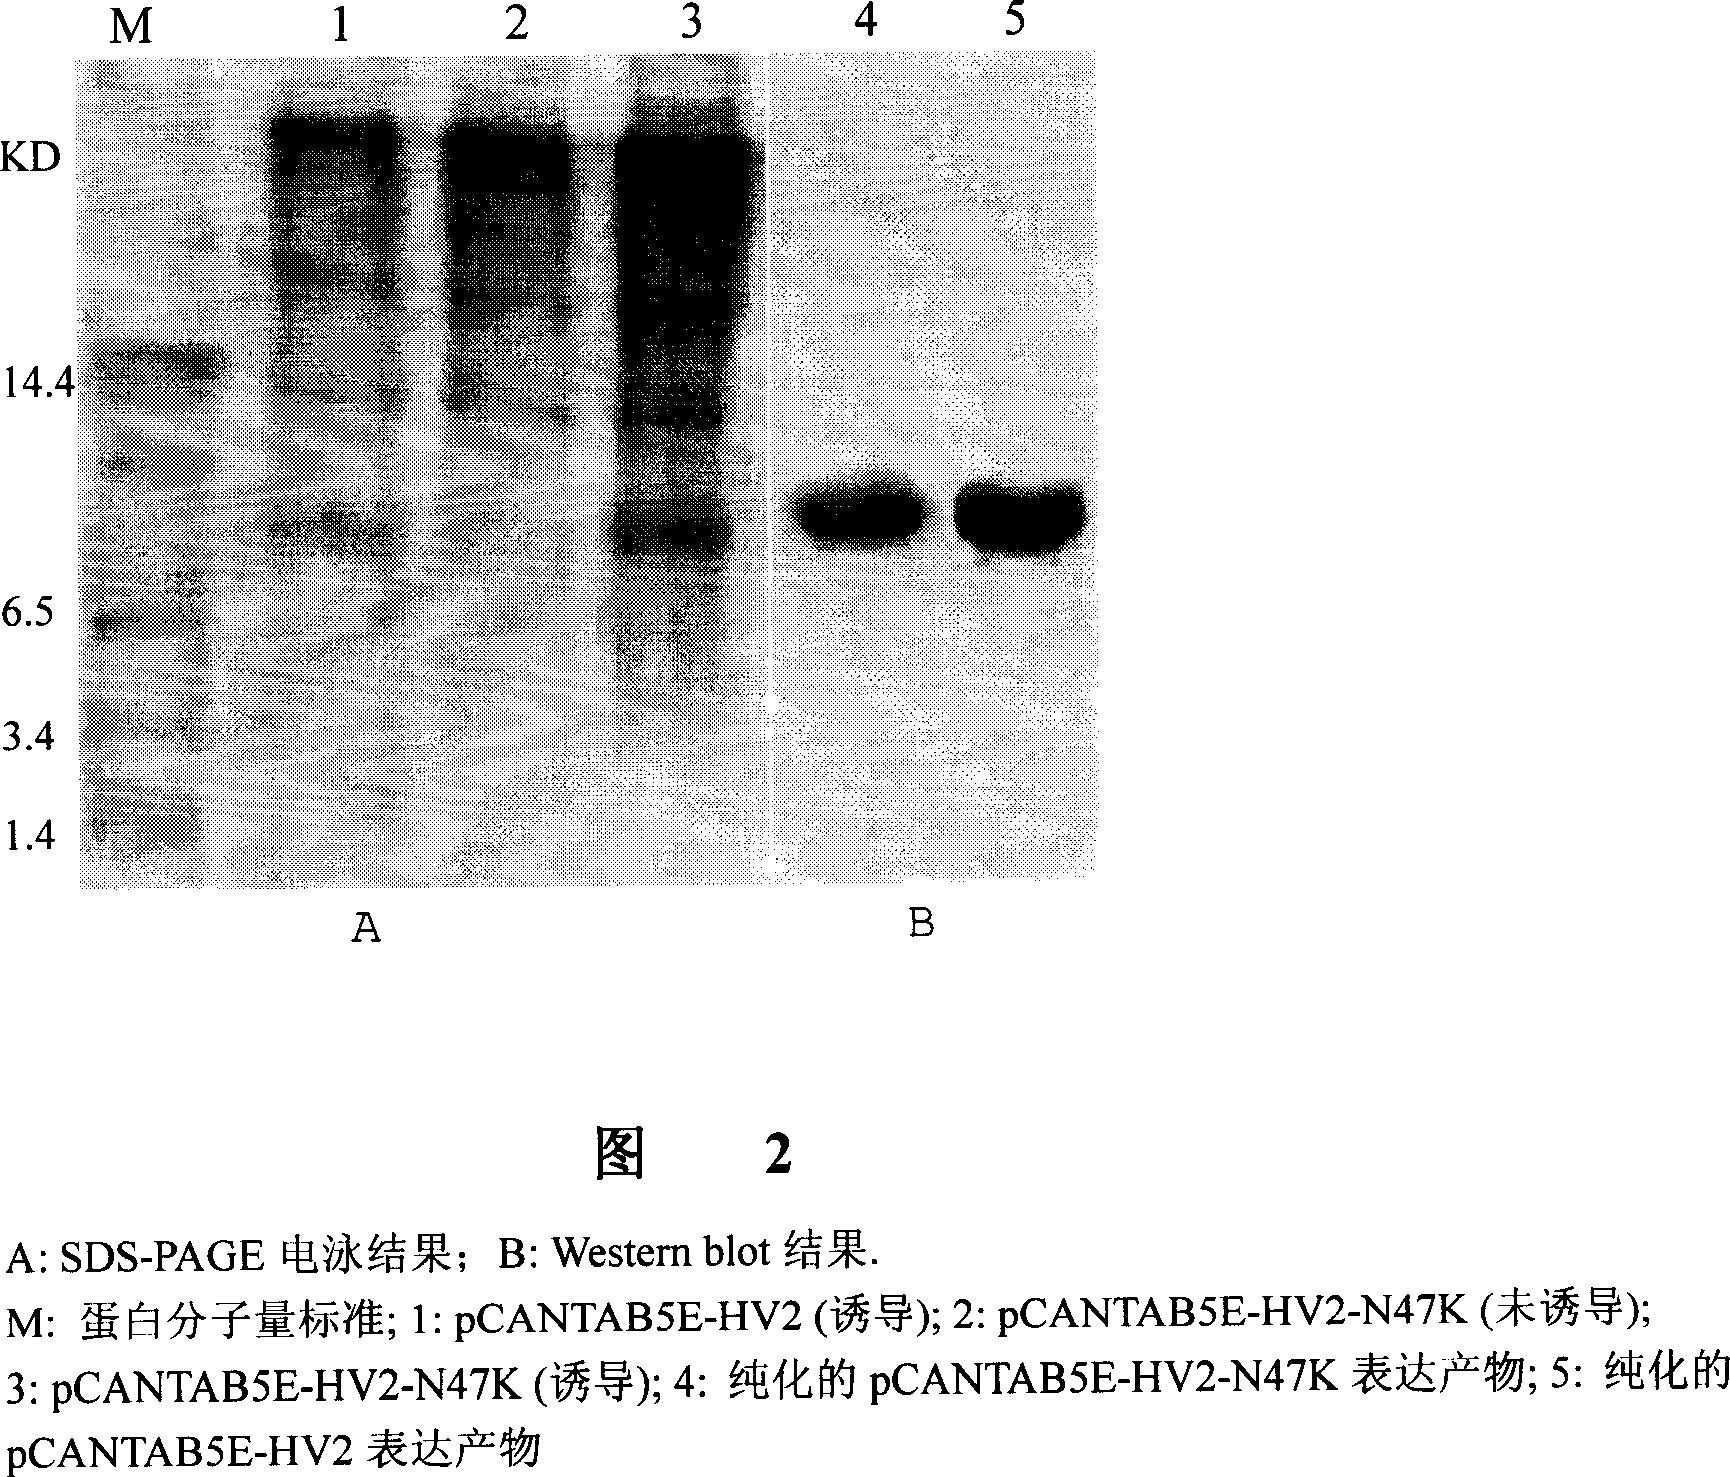 Method for preparing highly-active thrombin inhibitor